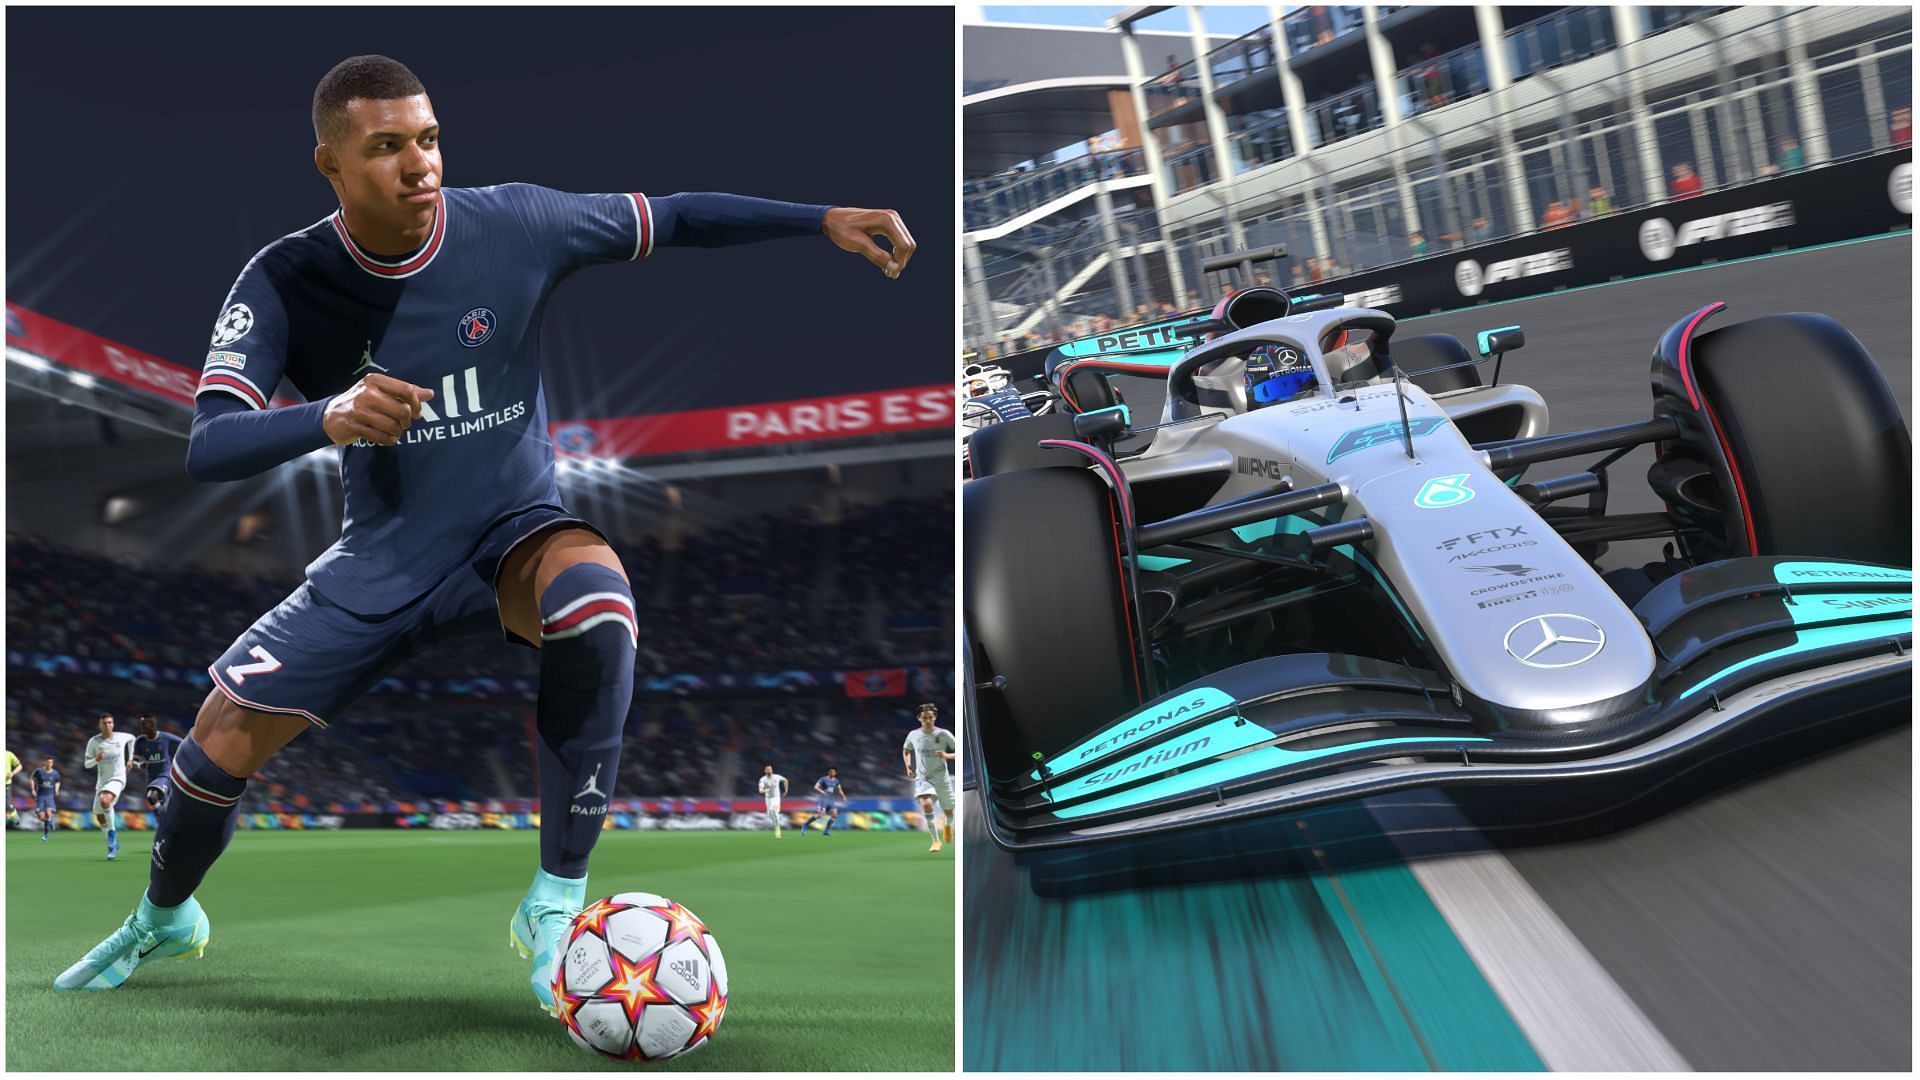 FIFA 22 and F1 22 are two new video games which sports and racing fans can get into (Image via EA and Codemasters)